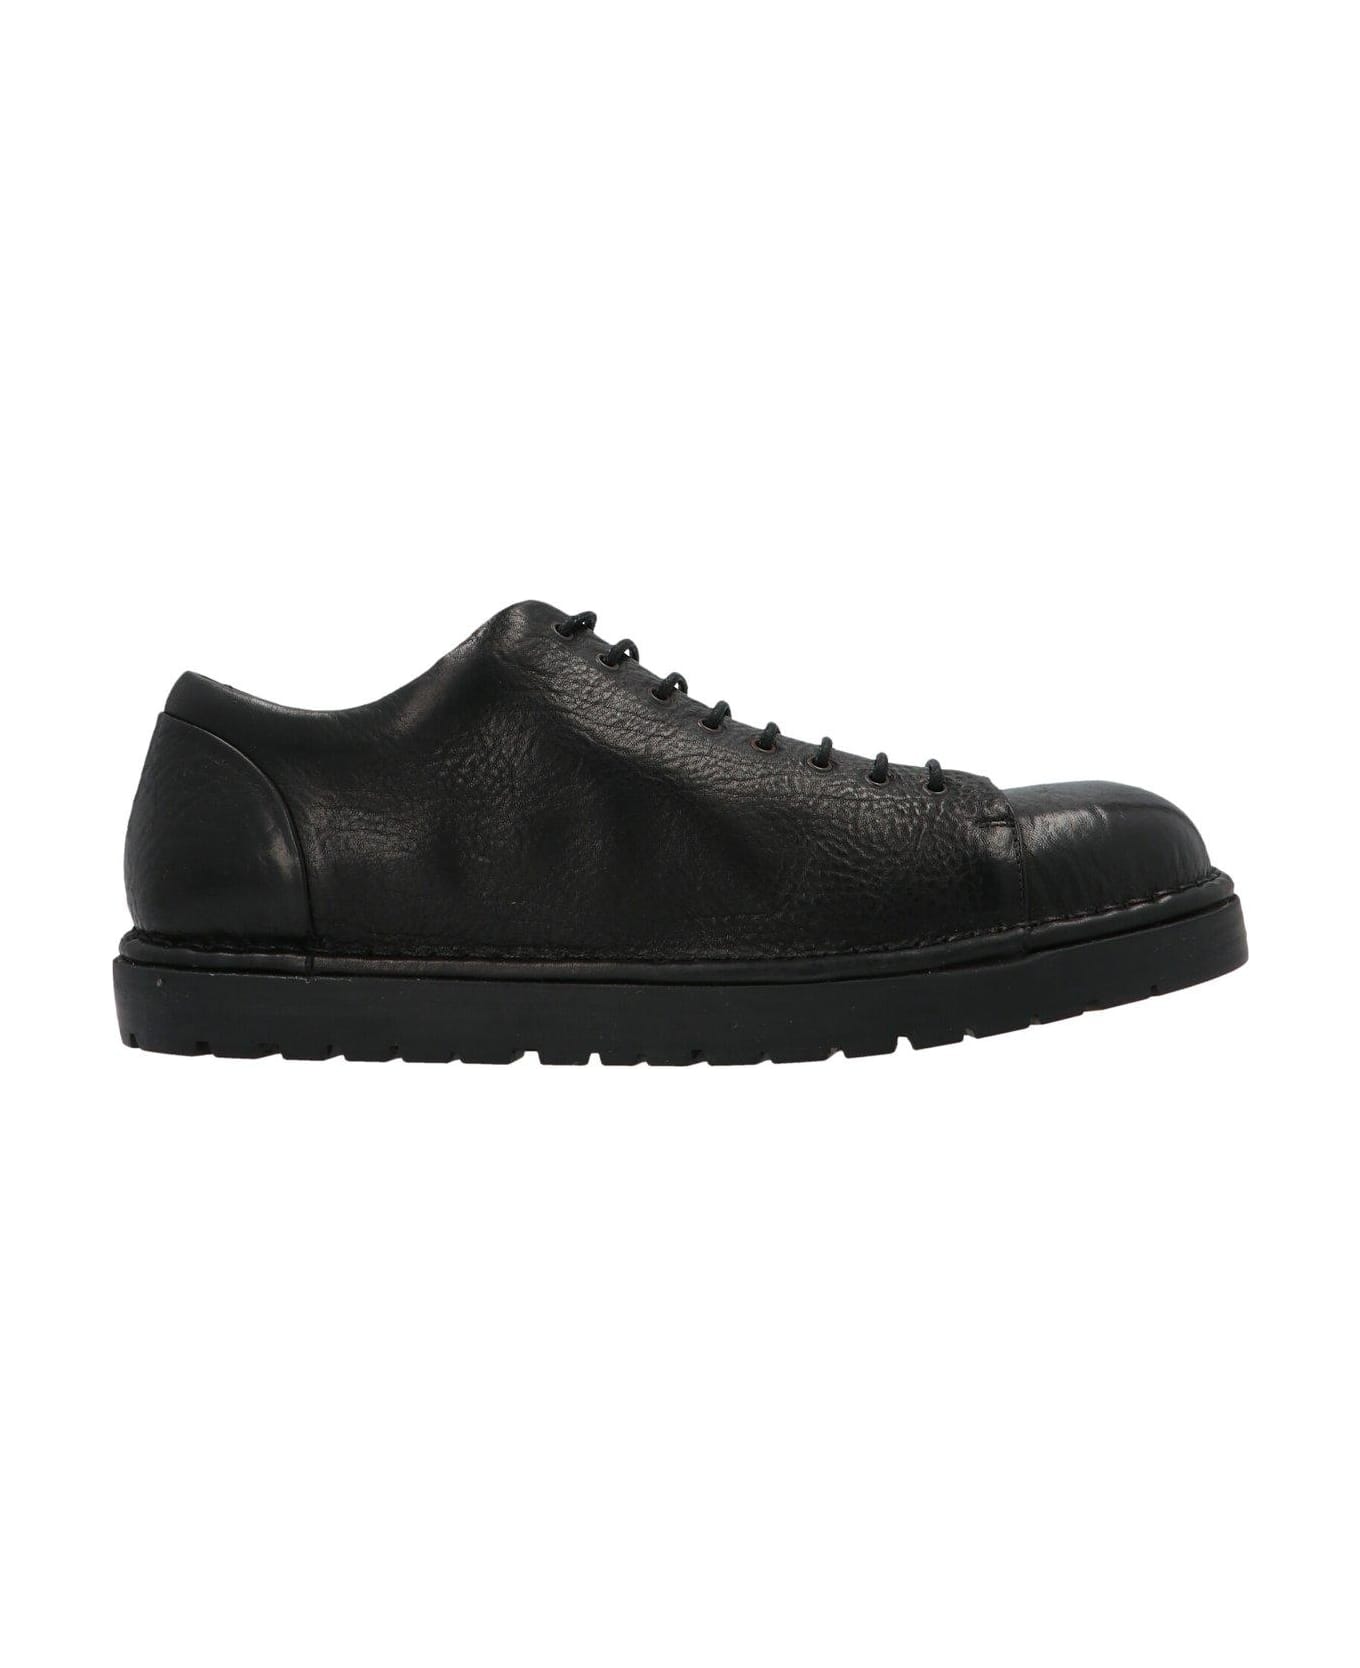 Marsell Pallottola Derby Shoes - Black